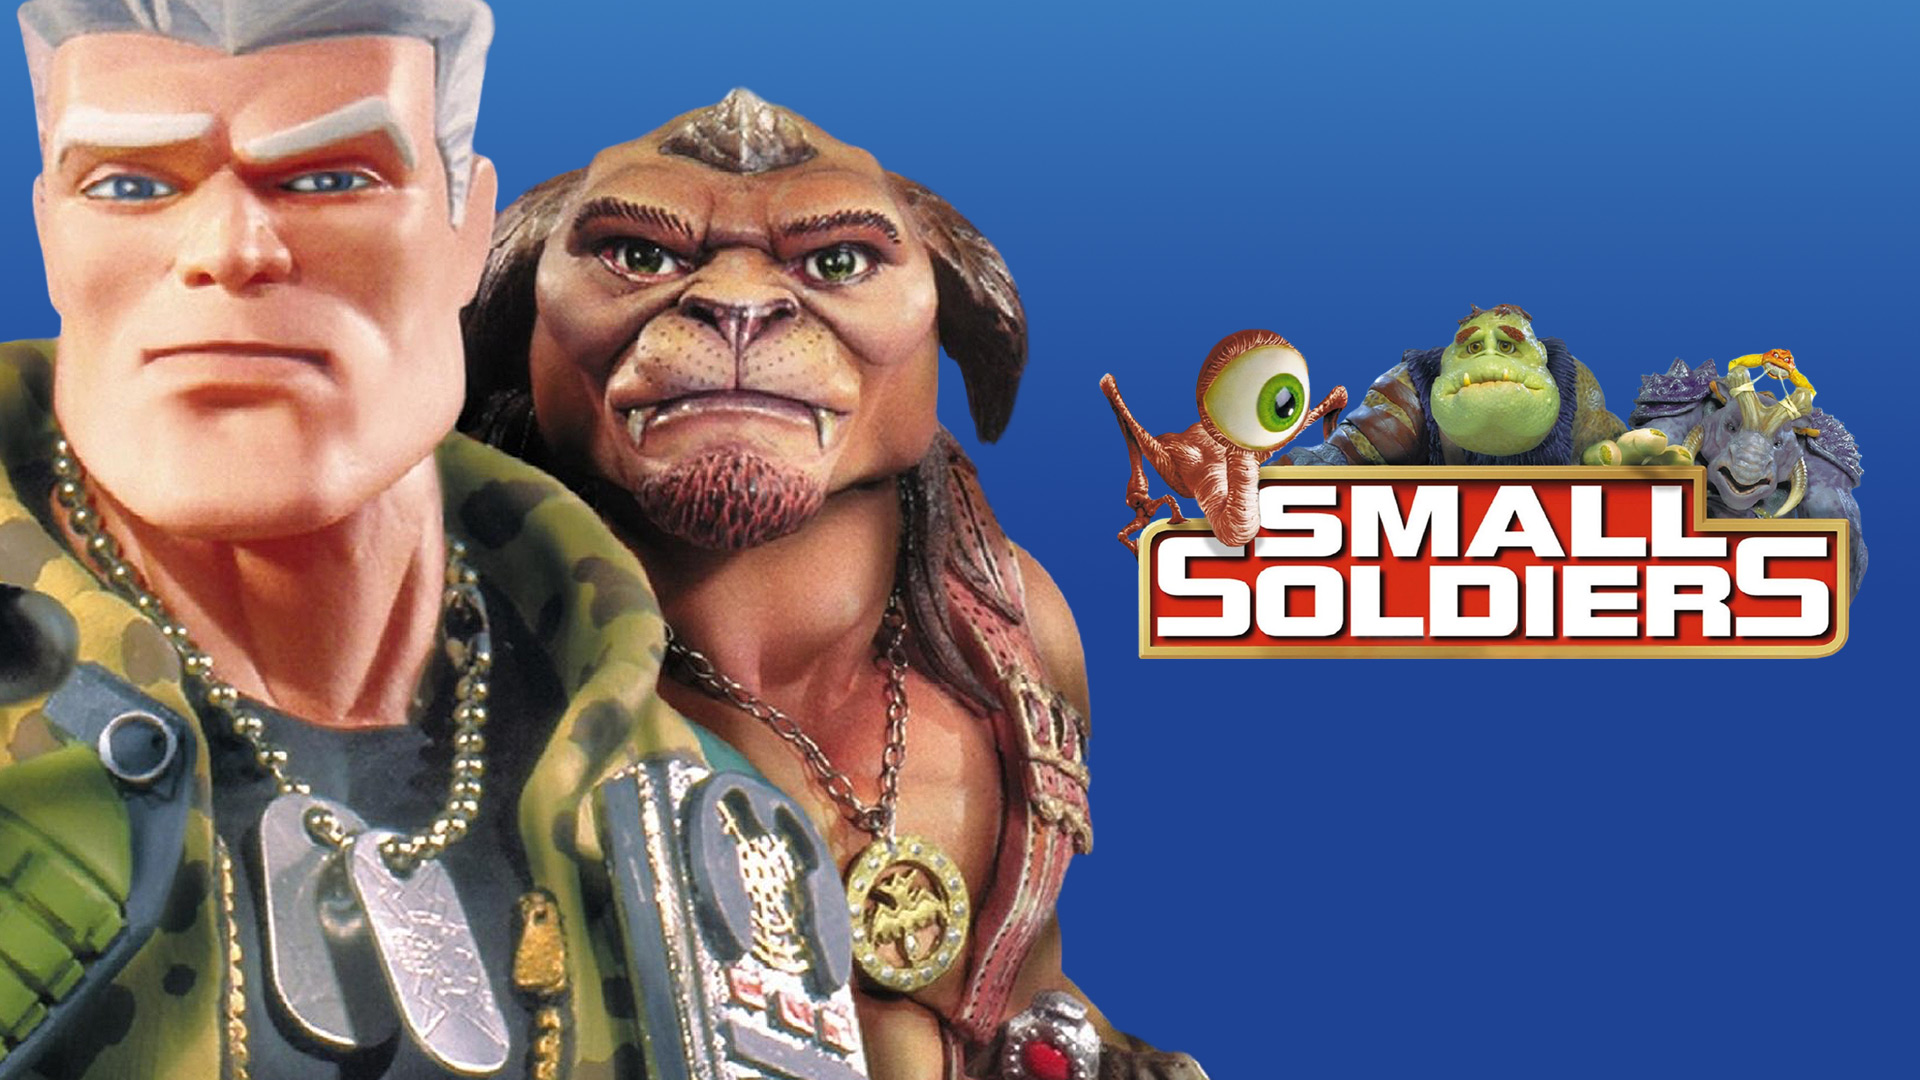 Small Soldiers HD Wallpaper Background Image